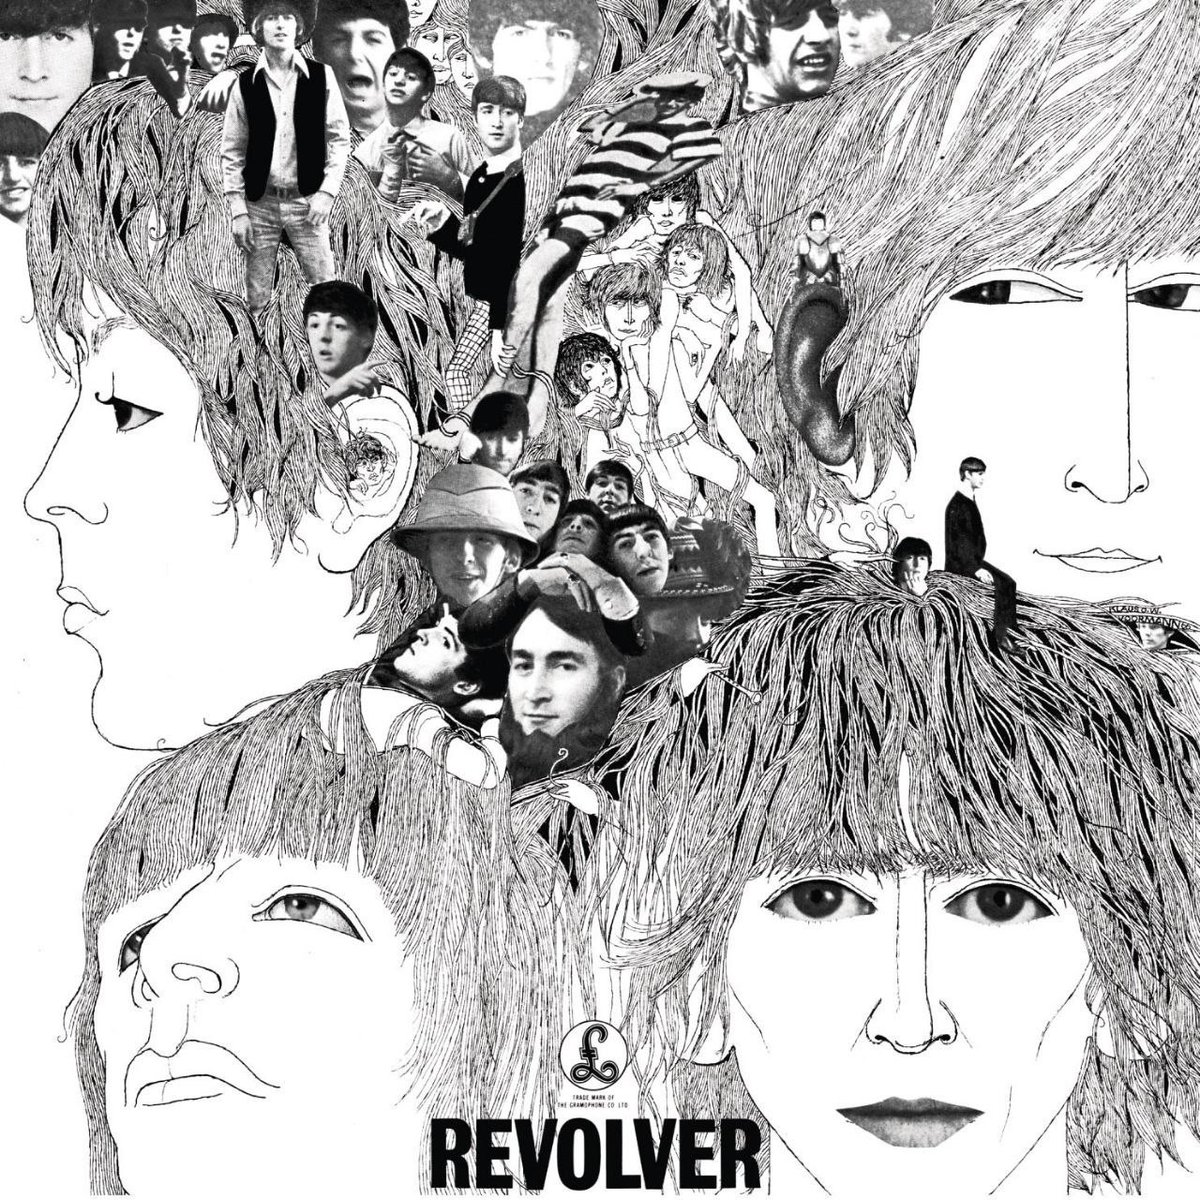 Robot Dreams x The Beatles Based on this beautiful album. REVOLVER (1966) All the lonely people Where do they all come from? All the lonely people Where do they all belong?